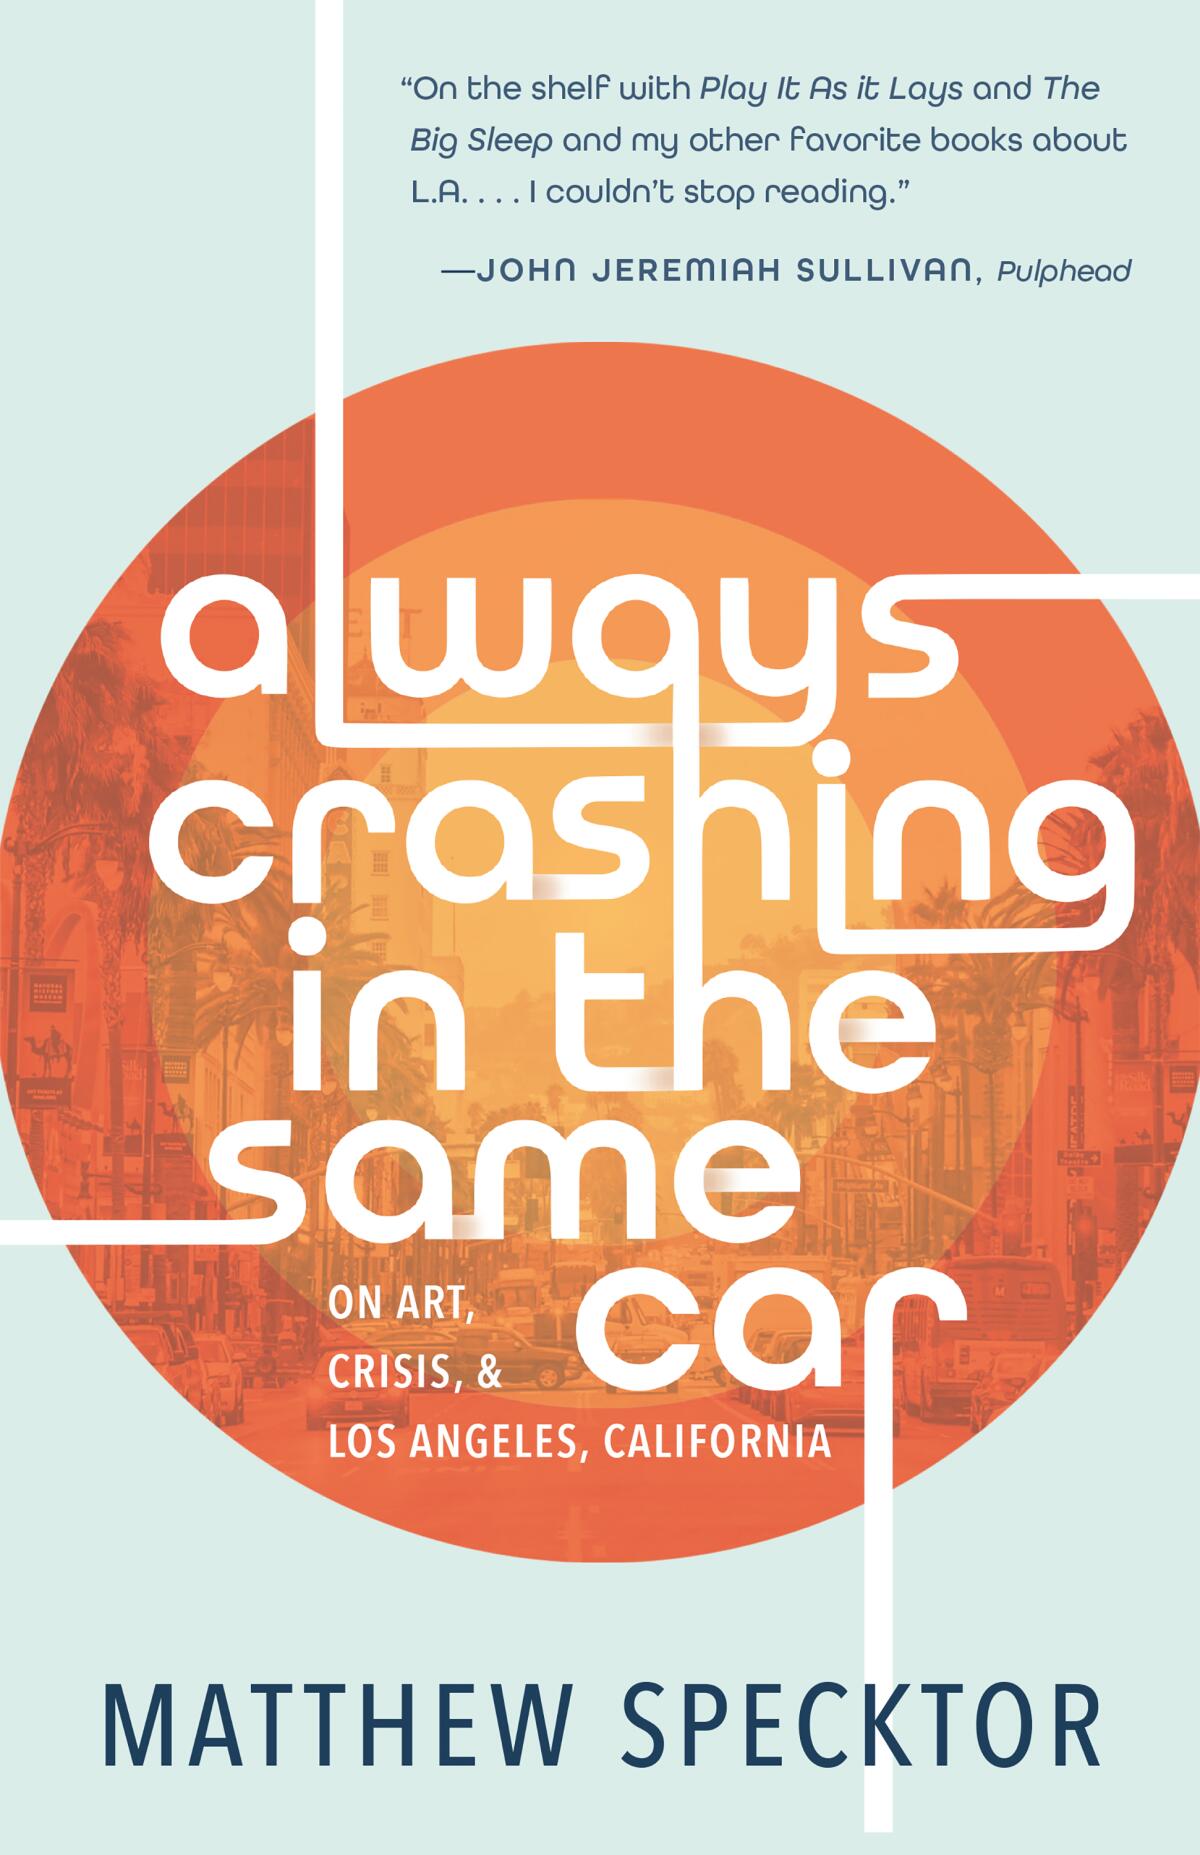 "Always Crashing in the Same Car: On Art, Crisis, and Los Angeles, California," by Matthew Specktor.